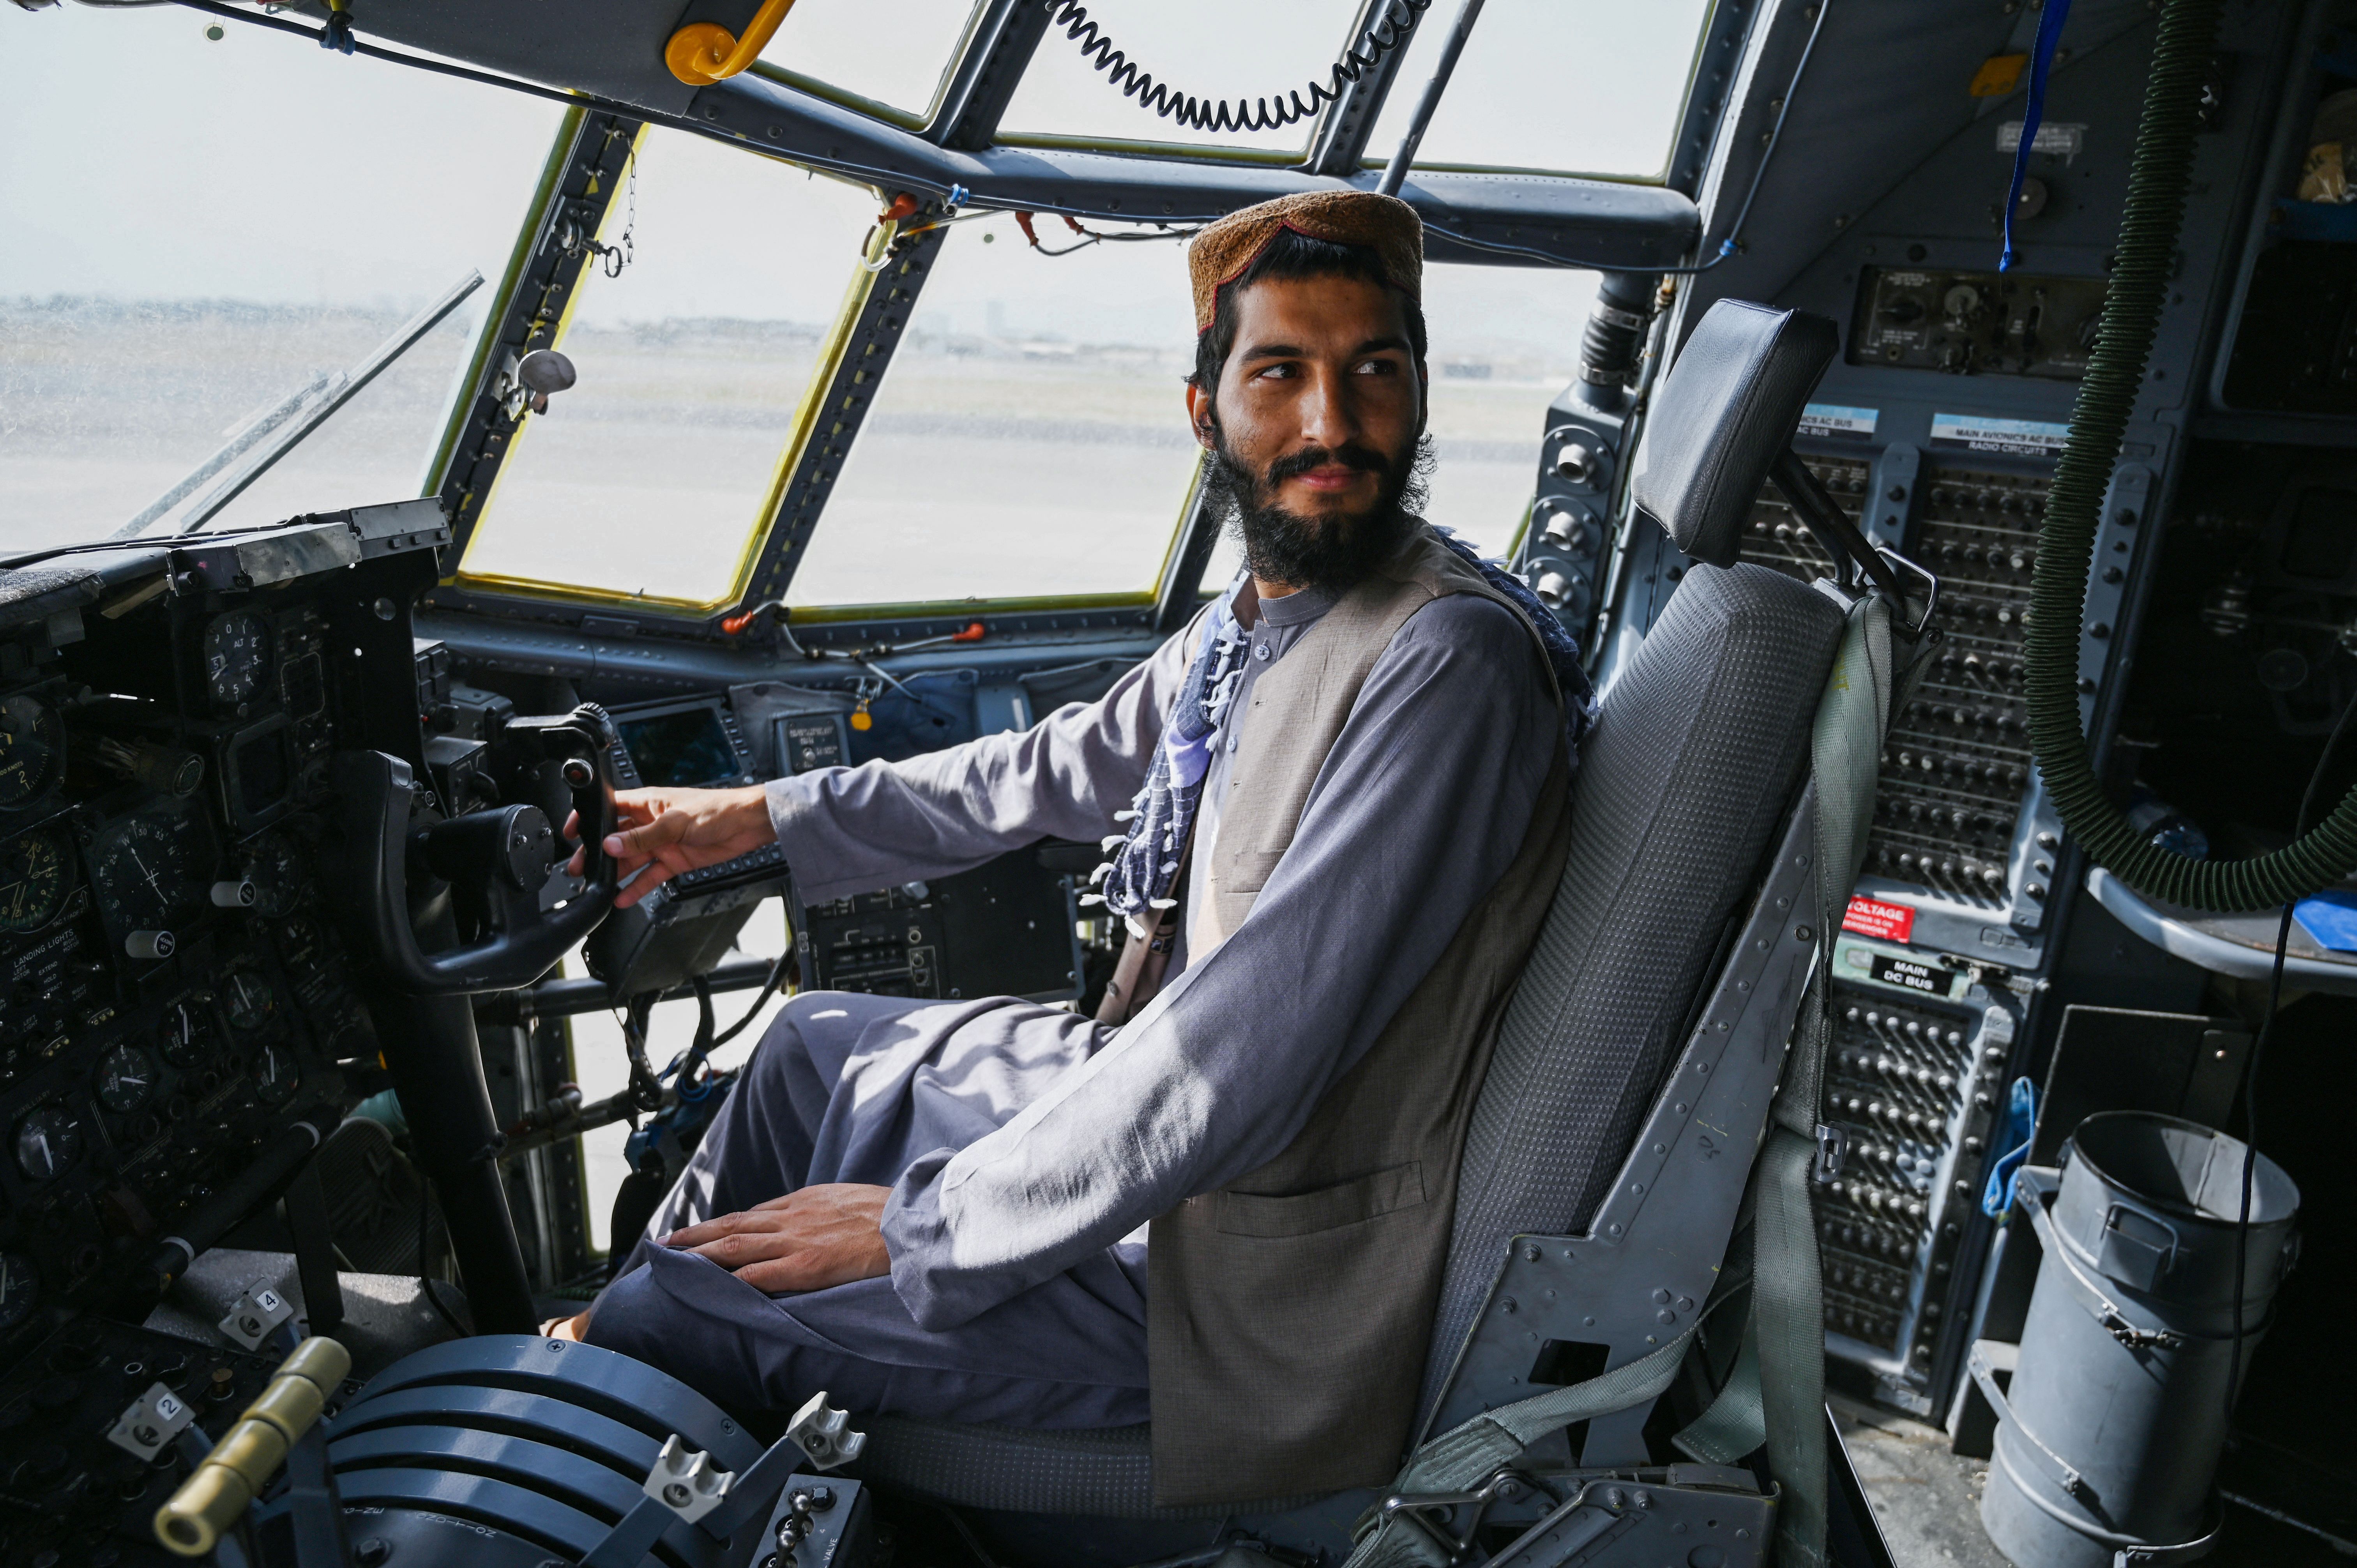  A Taliban fighter sits inside the cockpit of an Afghan Air Force aircraft at the airport in Kabul on August 31